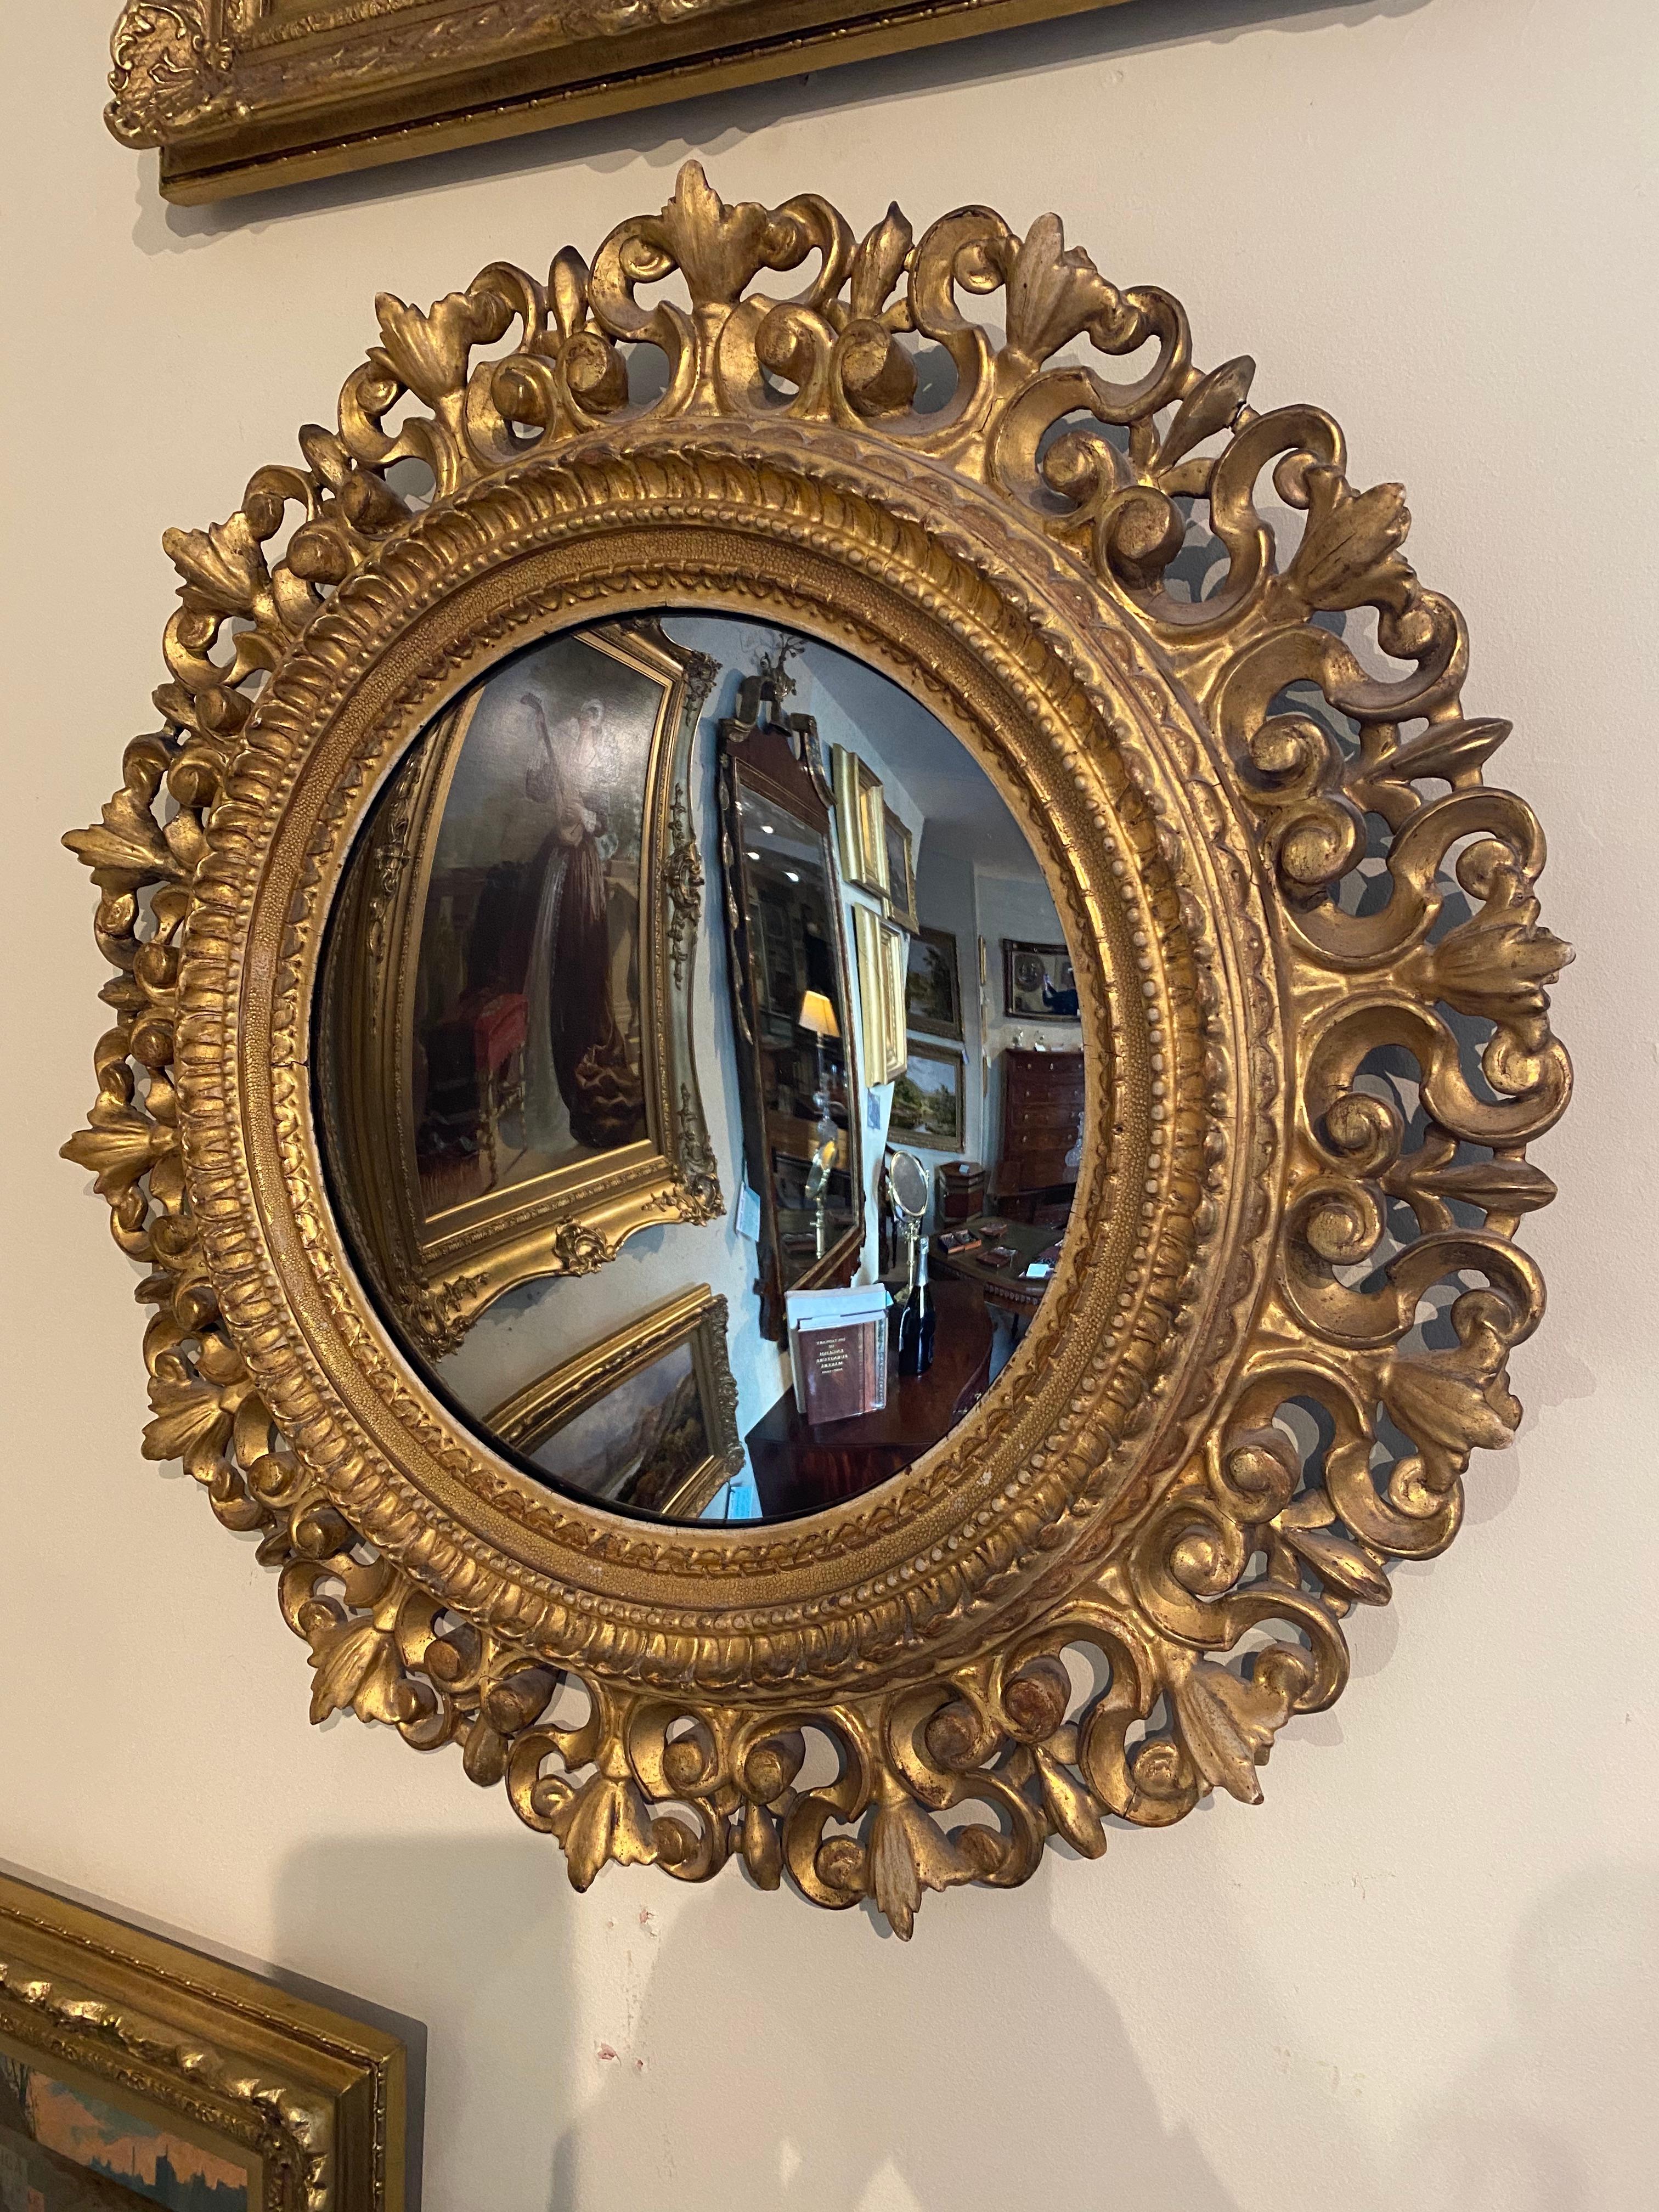 This Beautifully Presented Ornate Circular Convex Gilt Mirror In The Florentine Style Dates Back To The Mid 1800s. Although English In Construction, Its Carved Giltwood And Moulded Gesso Patterns Are Heavily Influenced By The Florentine Style Of The